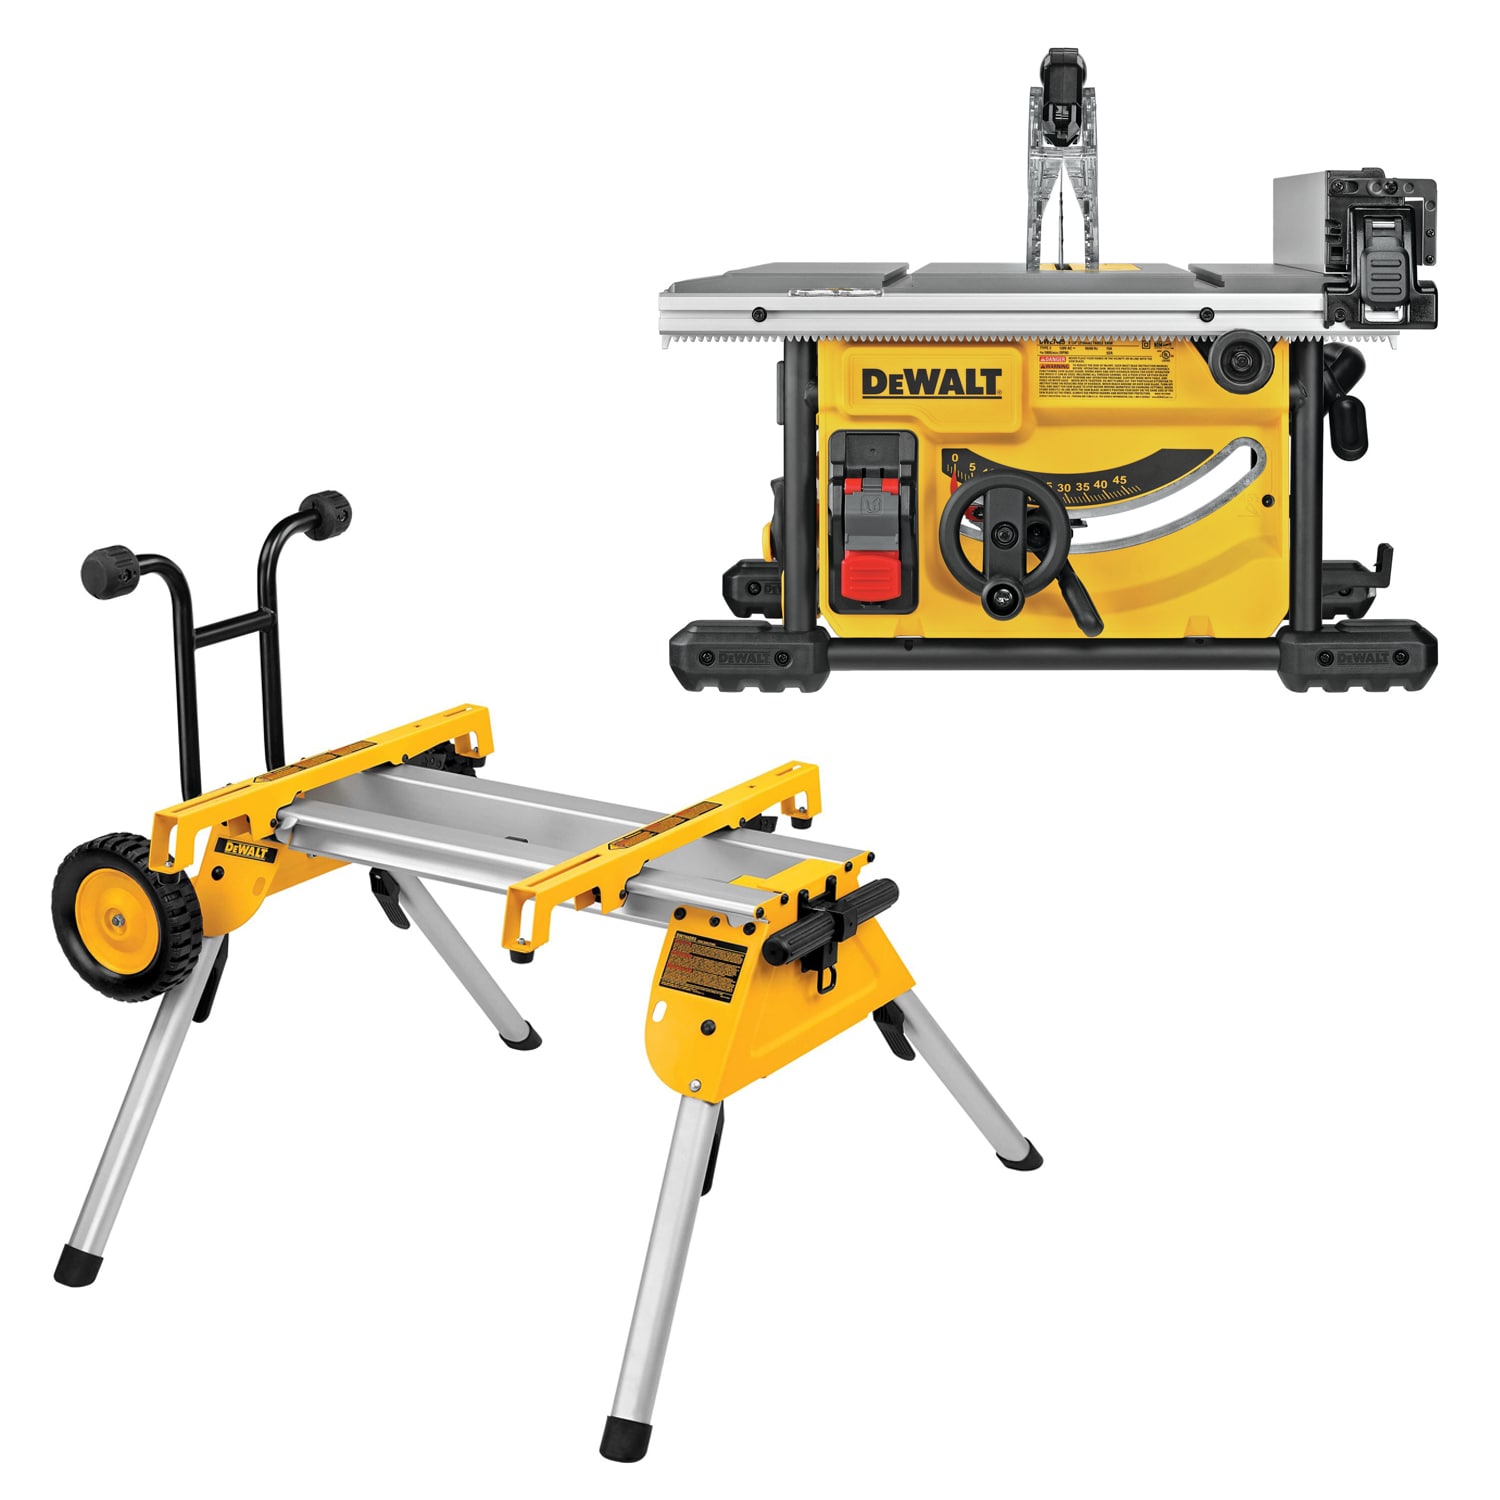 DEWALT Table Saw Stand, Rolling Stand, Collapsible and Portable, Lightweight and Compact (DW7440RS) - 2